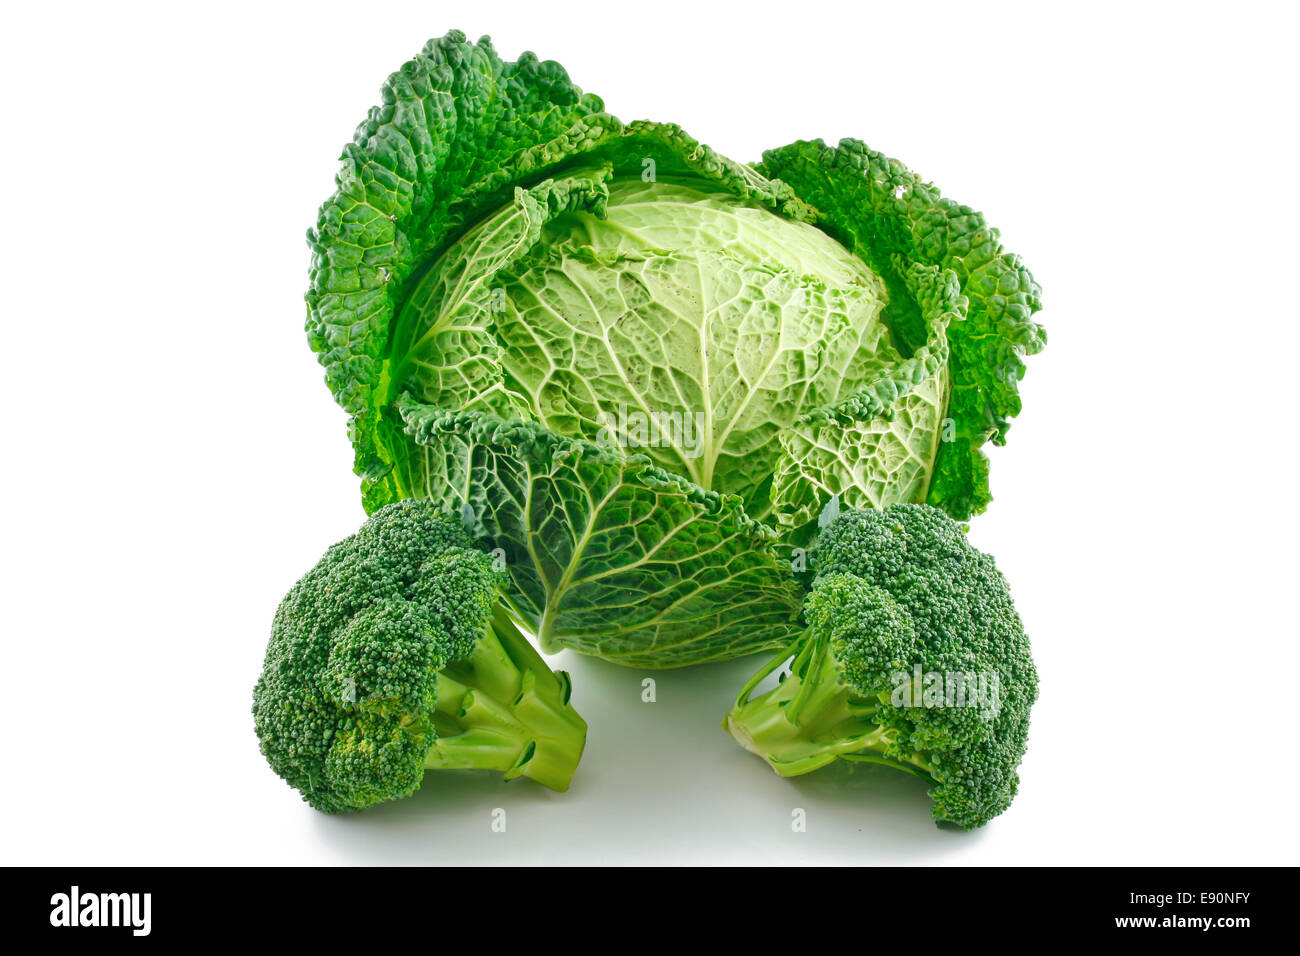 Ripe Broccoli and Savoy Cabbage Isolated Stock Photo